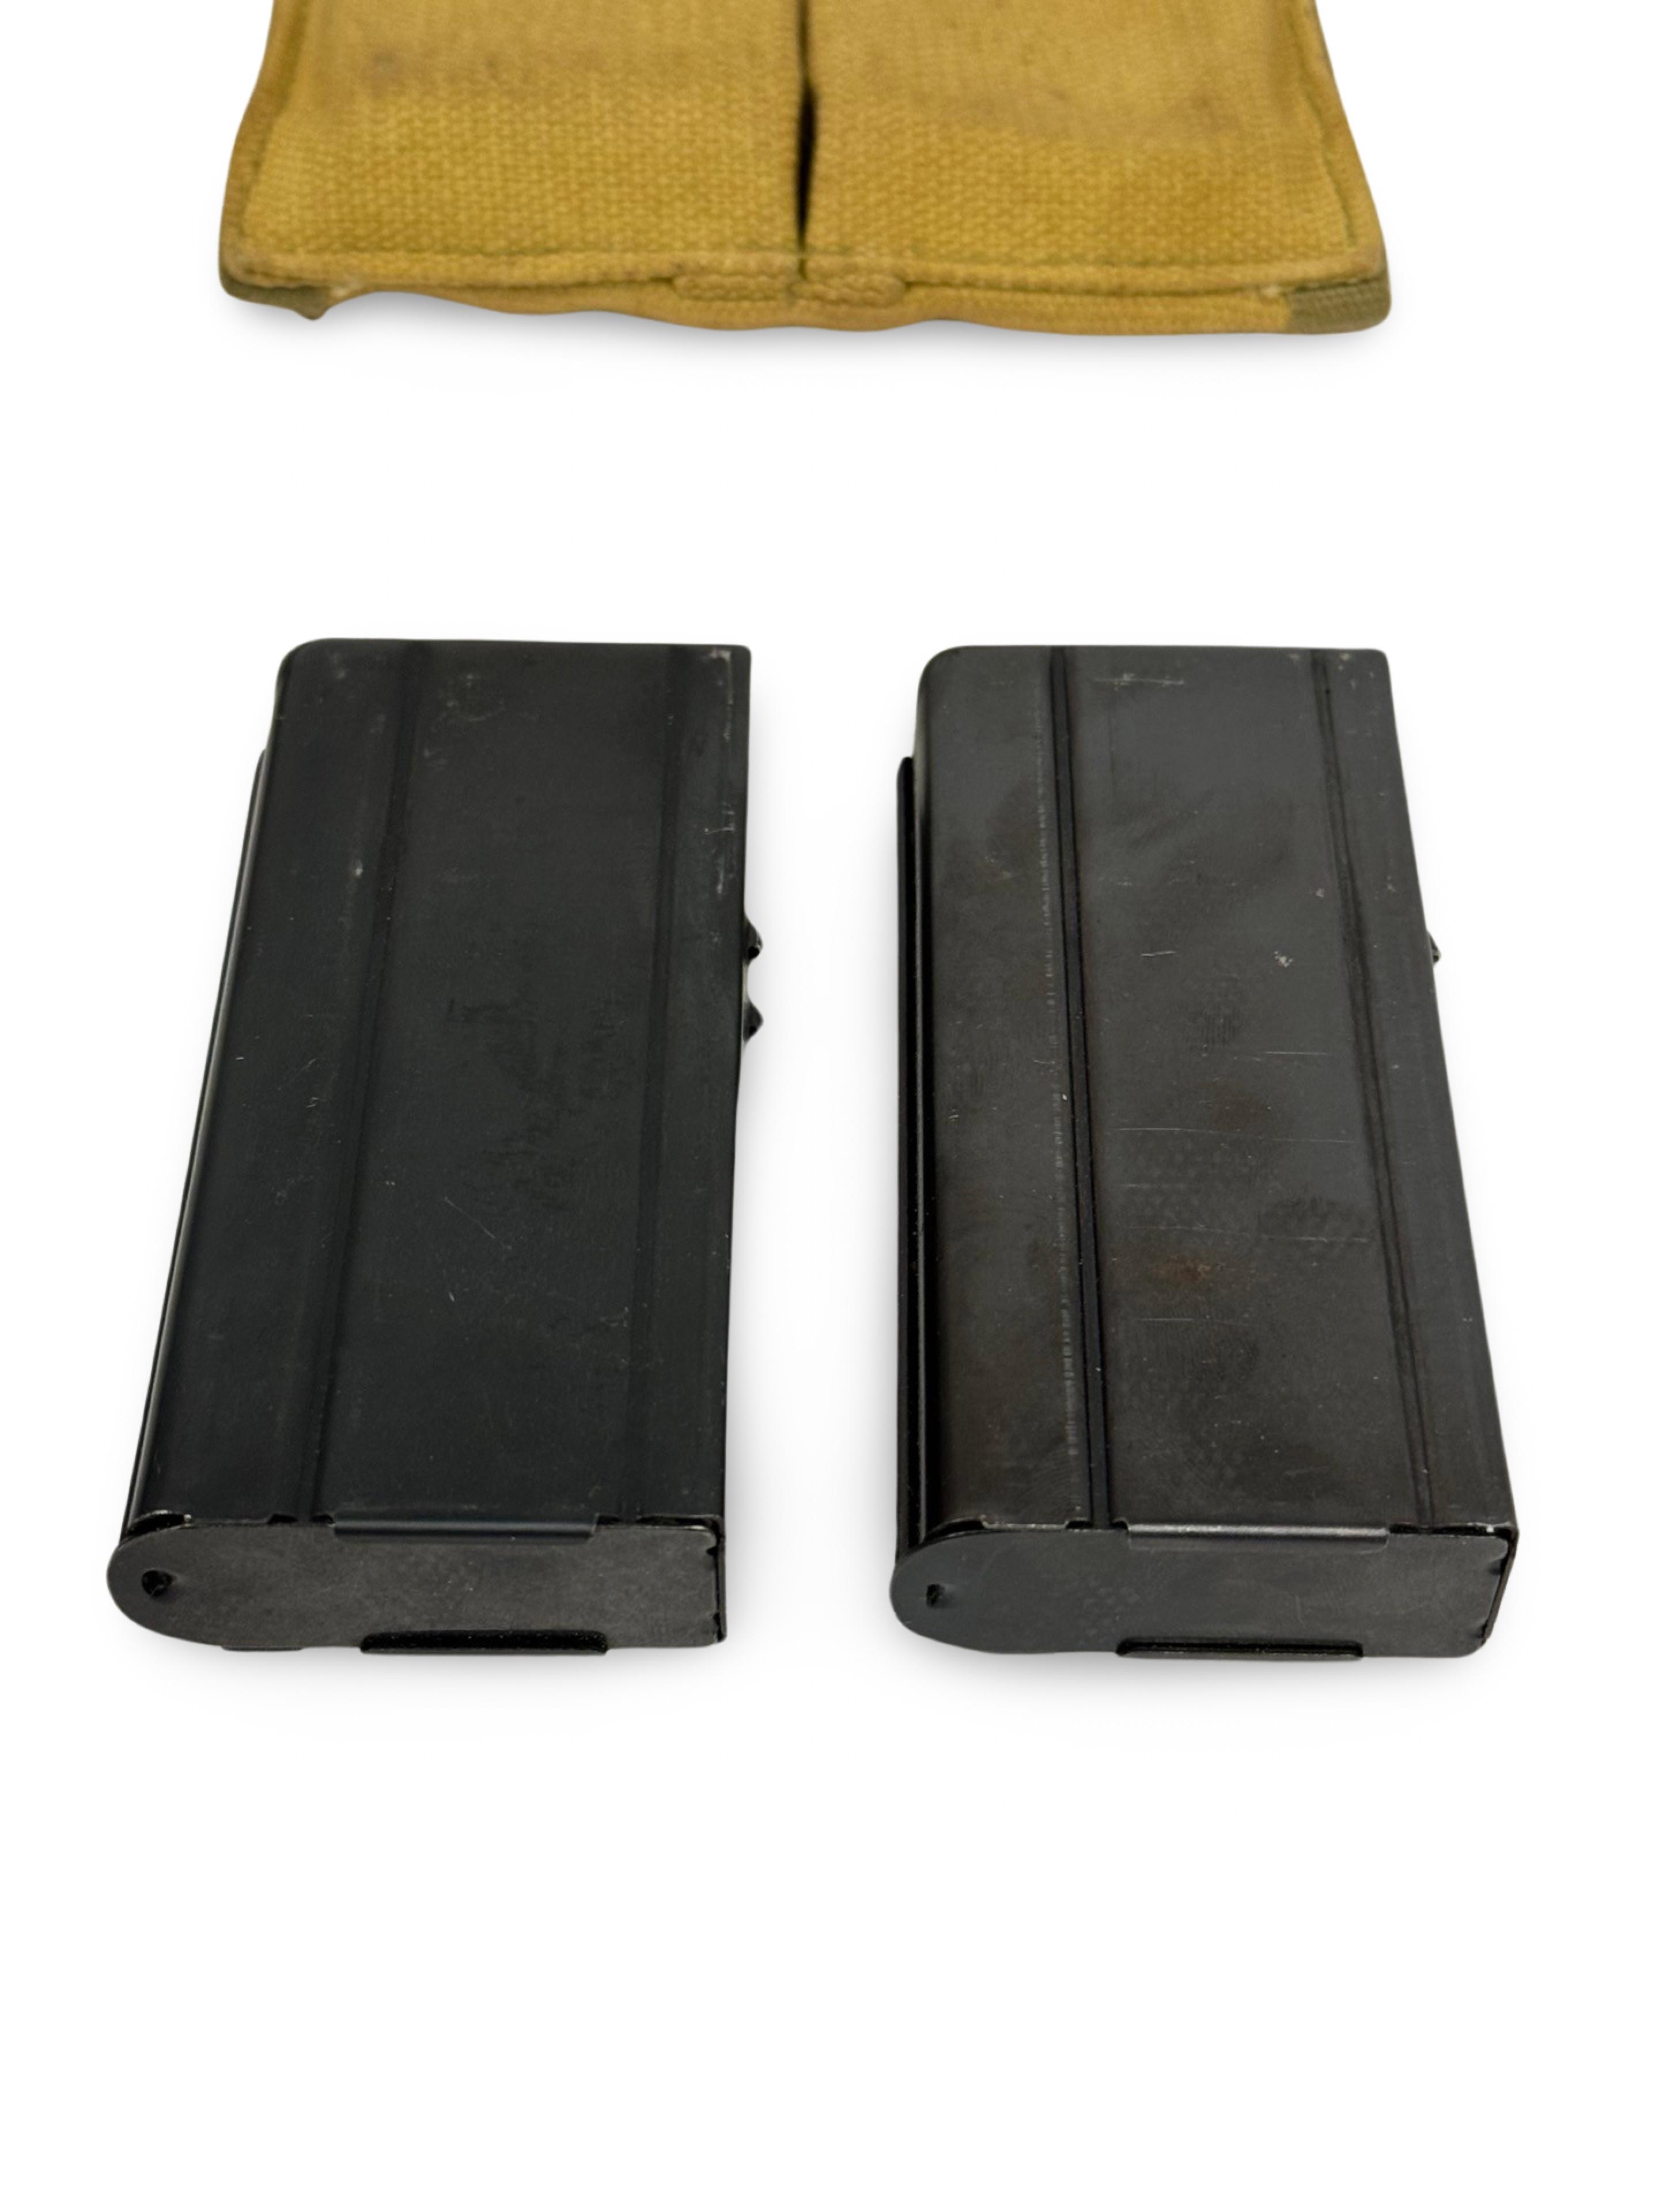 Lot of (4) WWII-Era Fully Loaded M1 Carbine 15rd. Magazines in Pouches